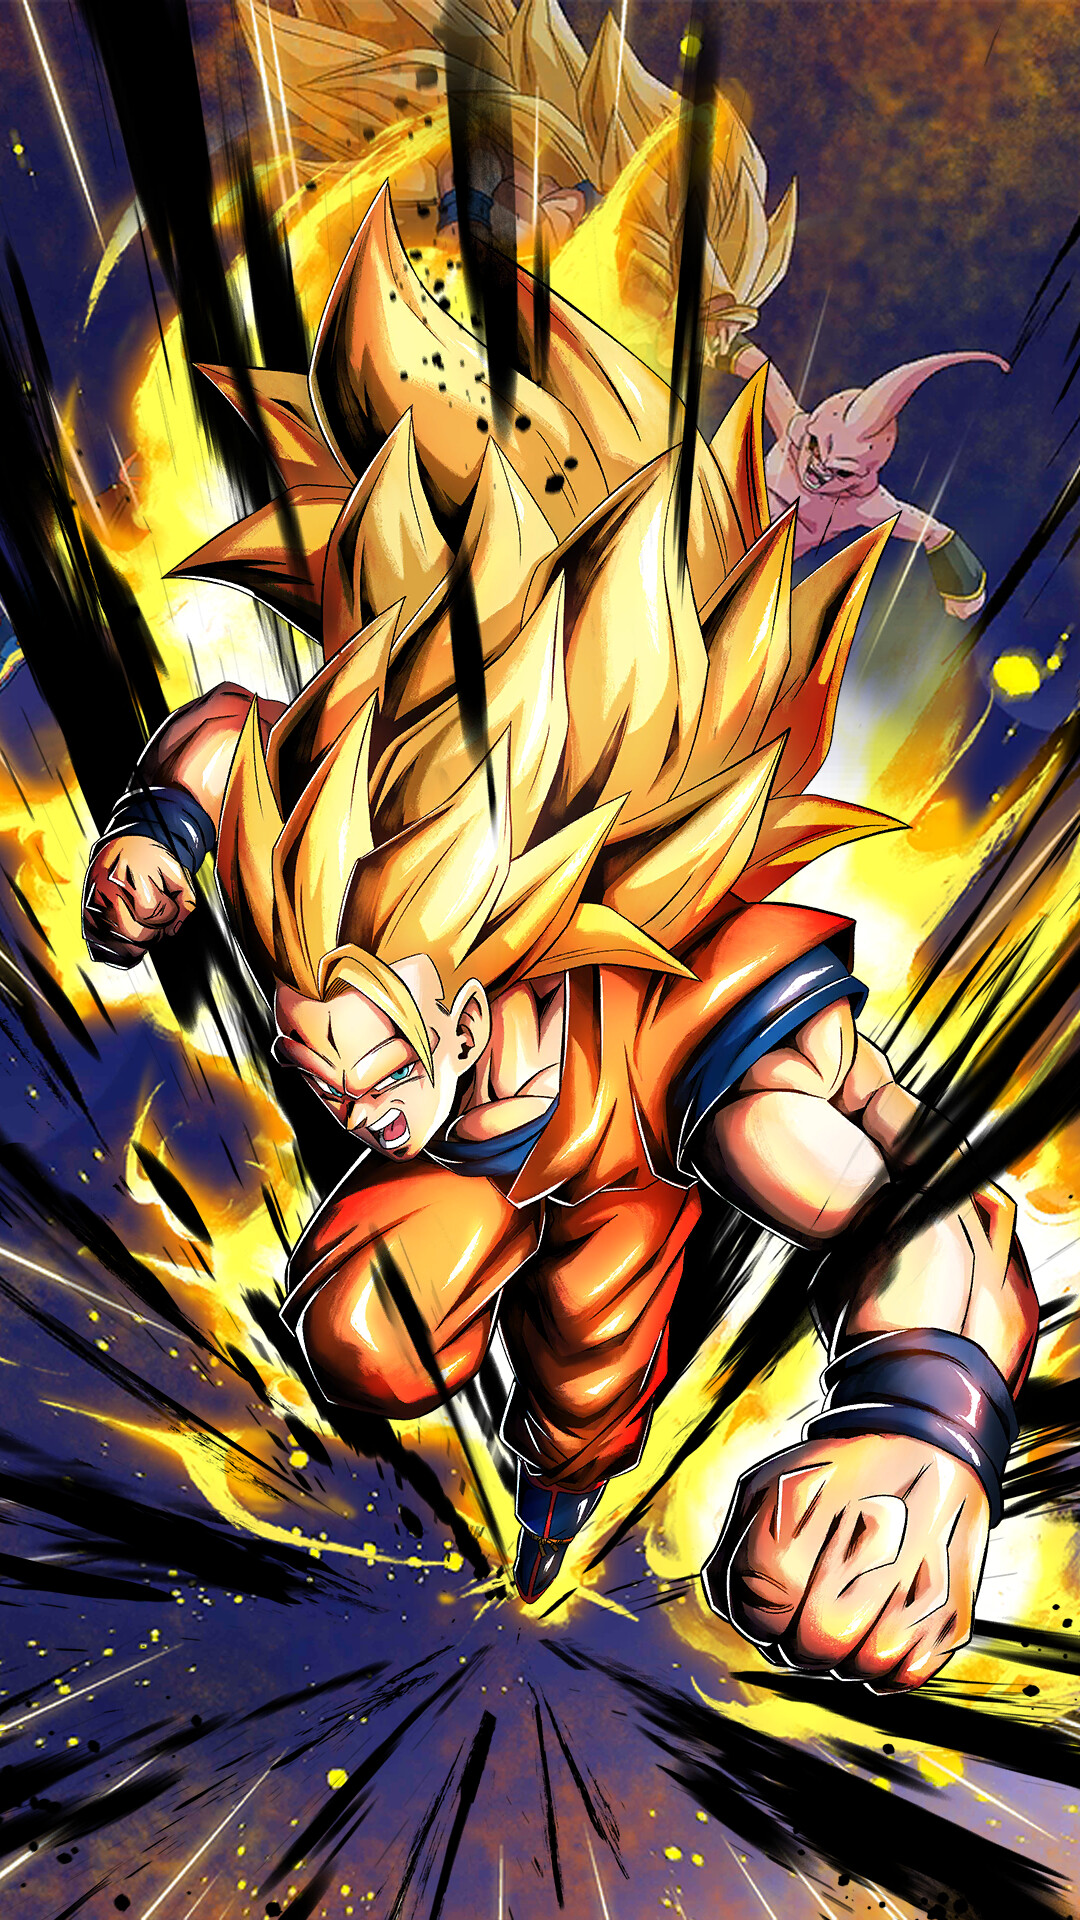 Super Saiyan 3, Power unleashed, Epic wallpapers, High energy, 1080x1920 Full HD Phone